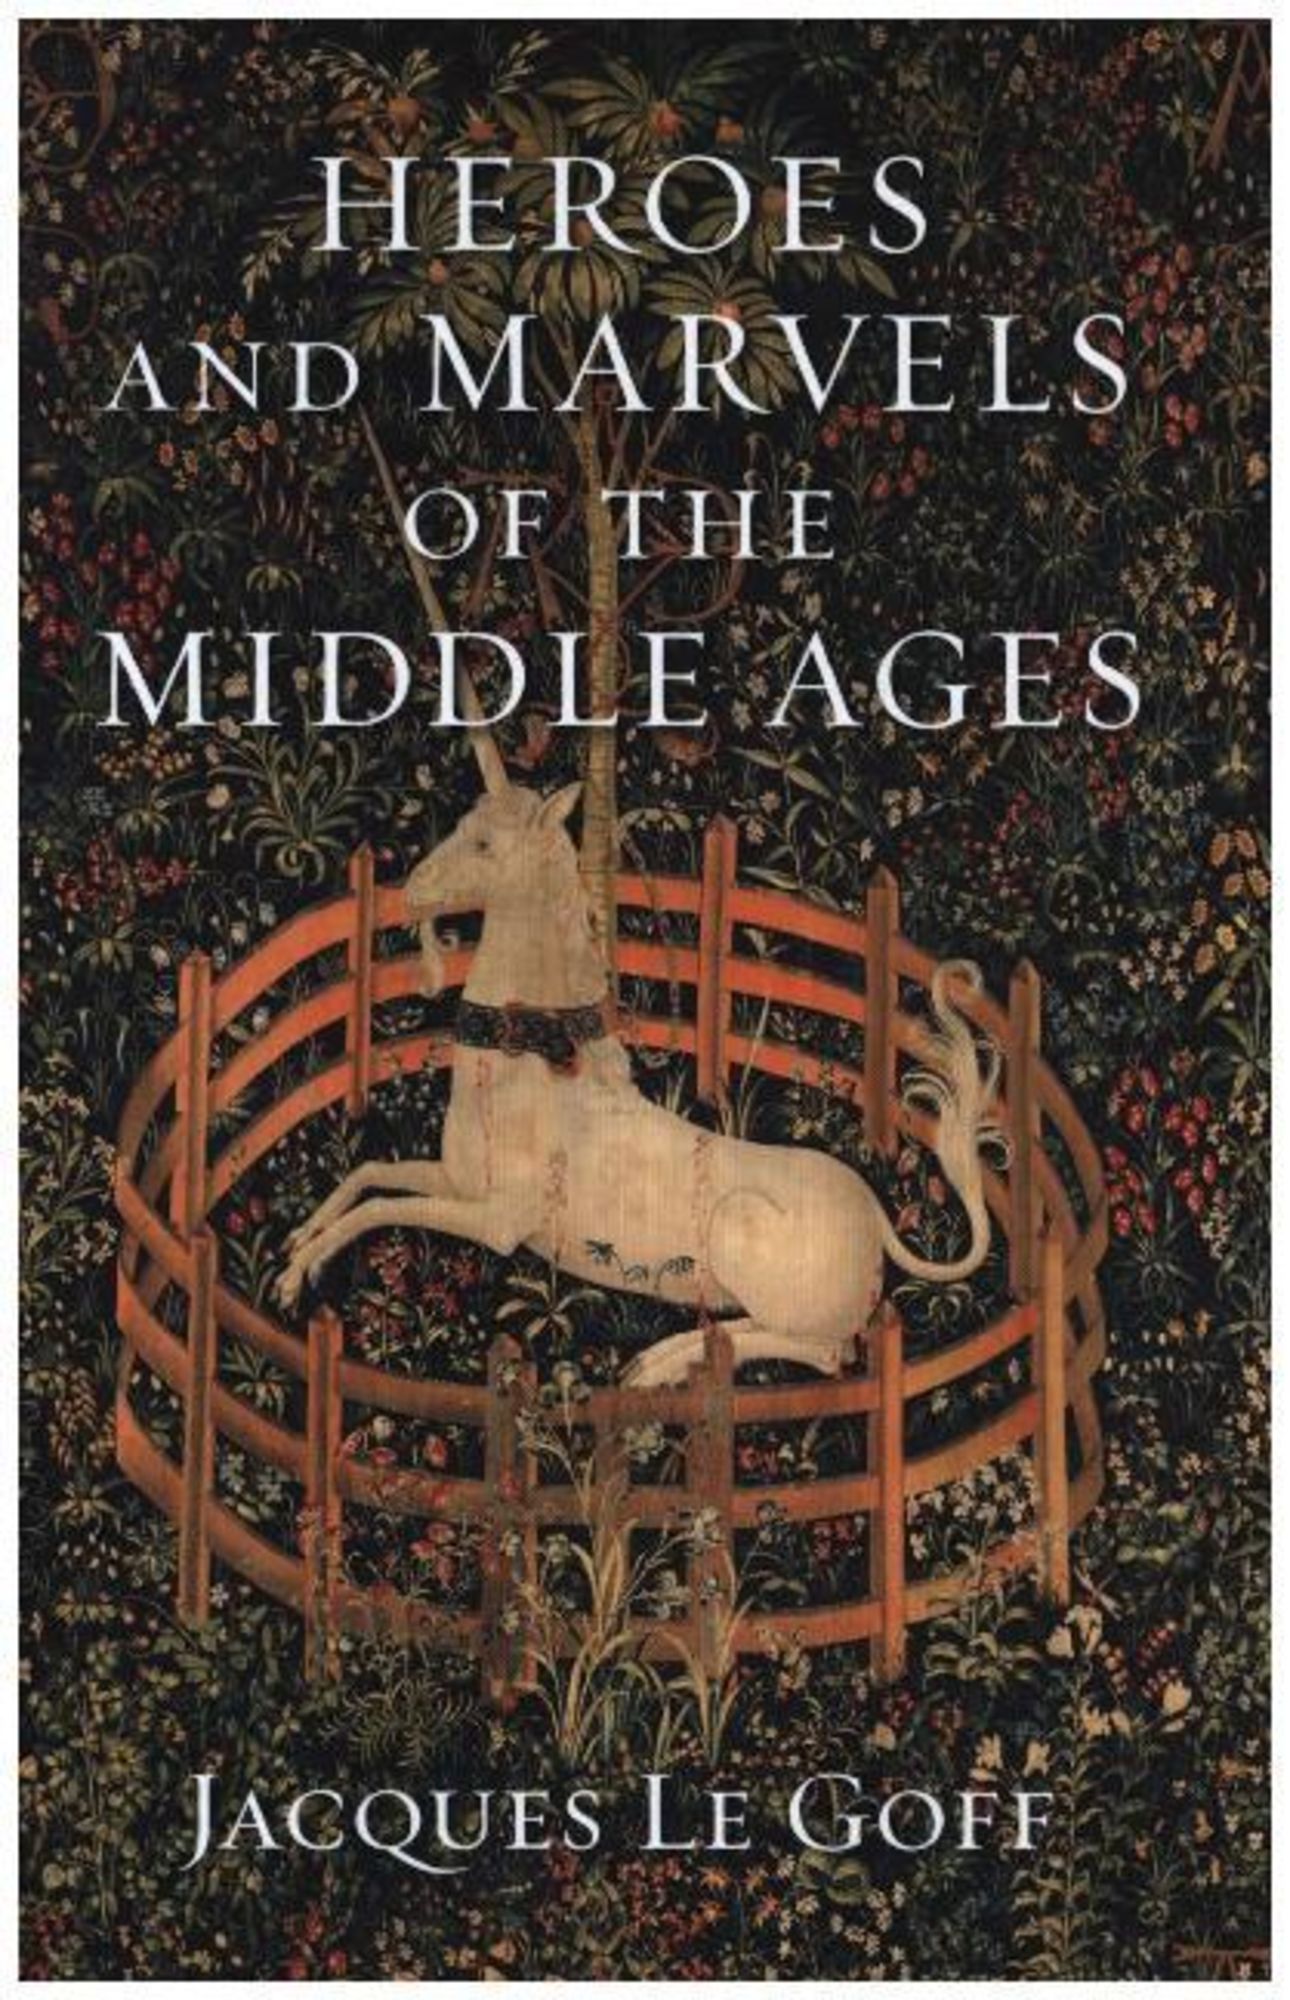 Marvels　of　Ages'　'Jacques　von　and　Goff'　Middle　Ausgabe'　'978-1-78914-212-9'　Heroes　Le　the　'Gebundene